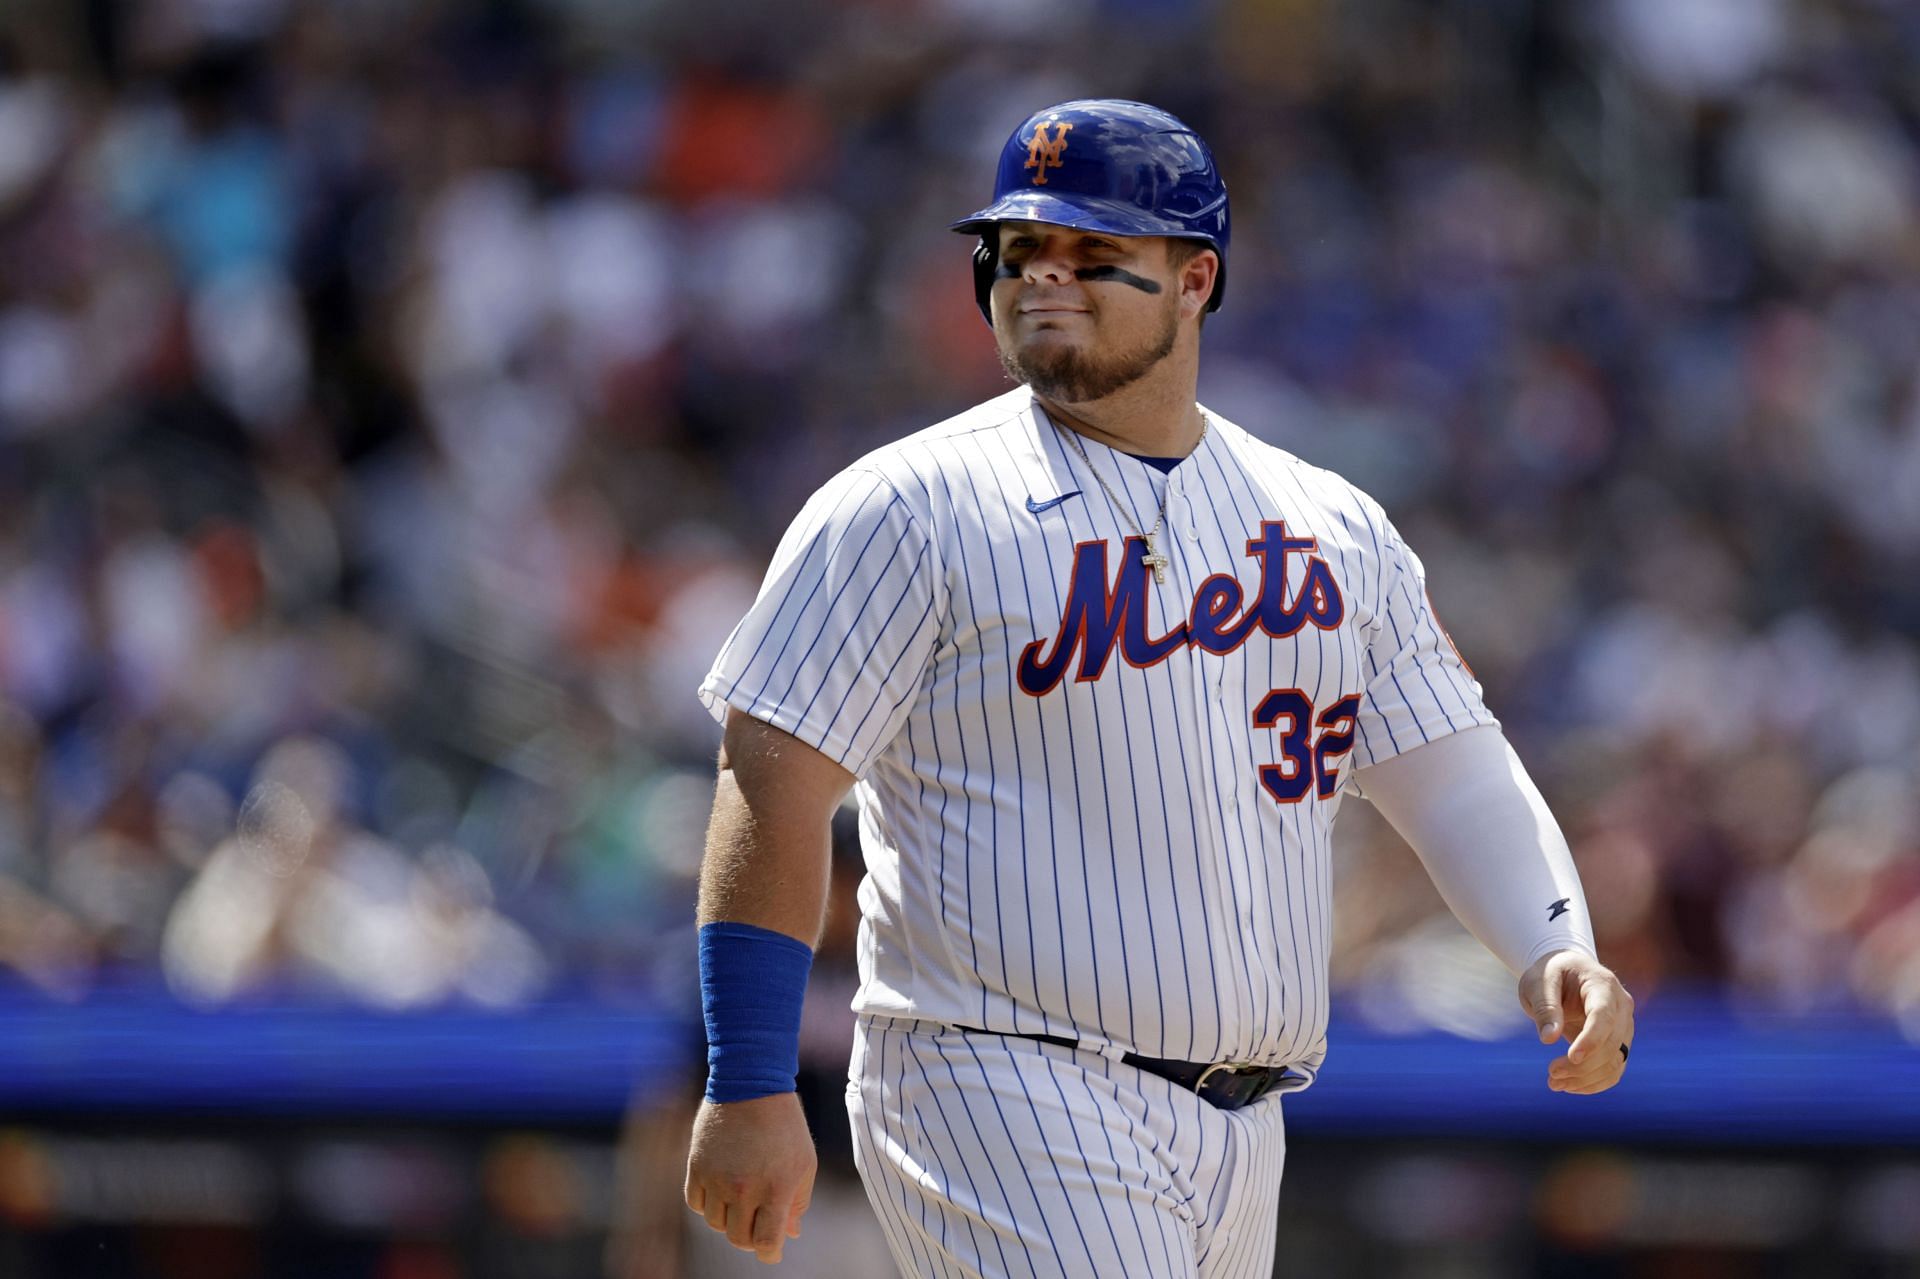 Daniel Vogelbach adds to Mets legend with hilarious walk-up song